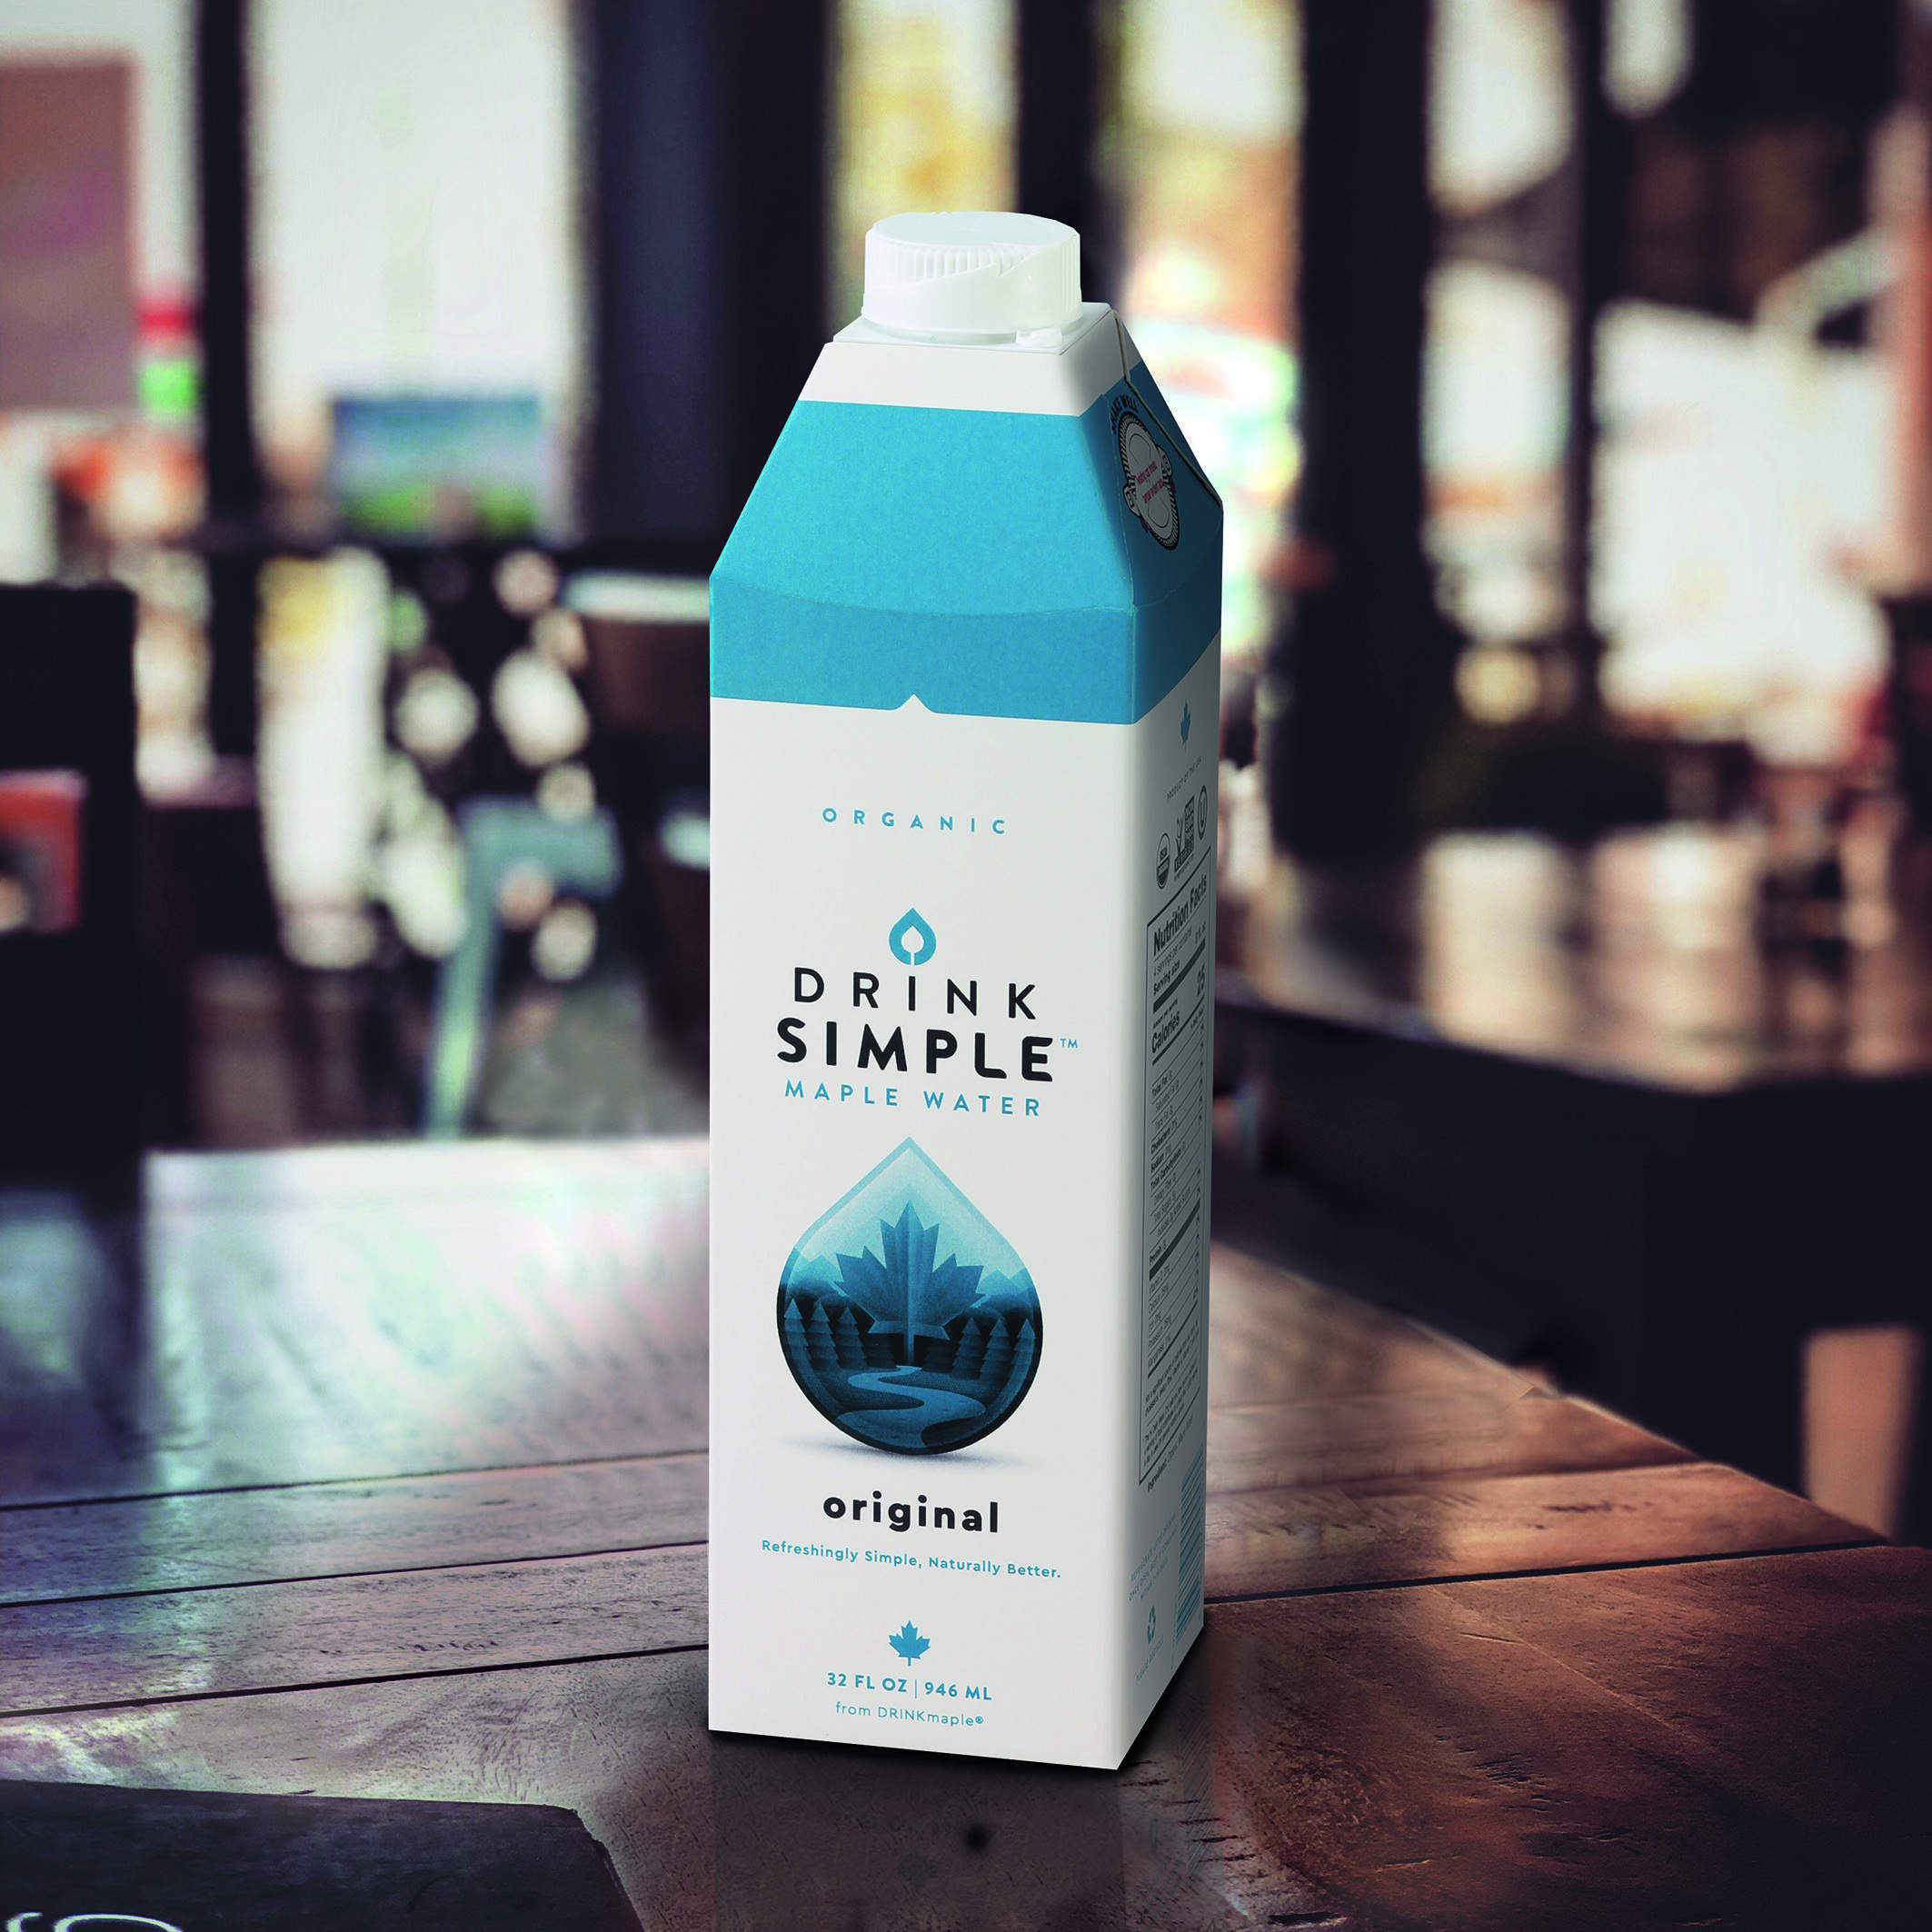 SIG provides recyclable combidome cartons for Drink Simple Maple Water